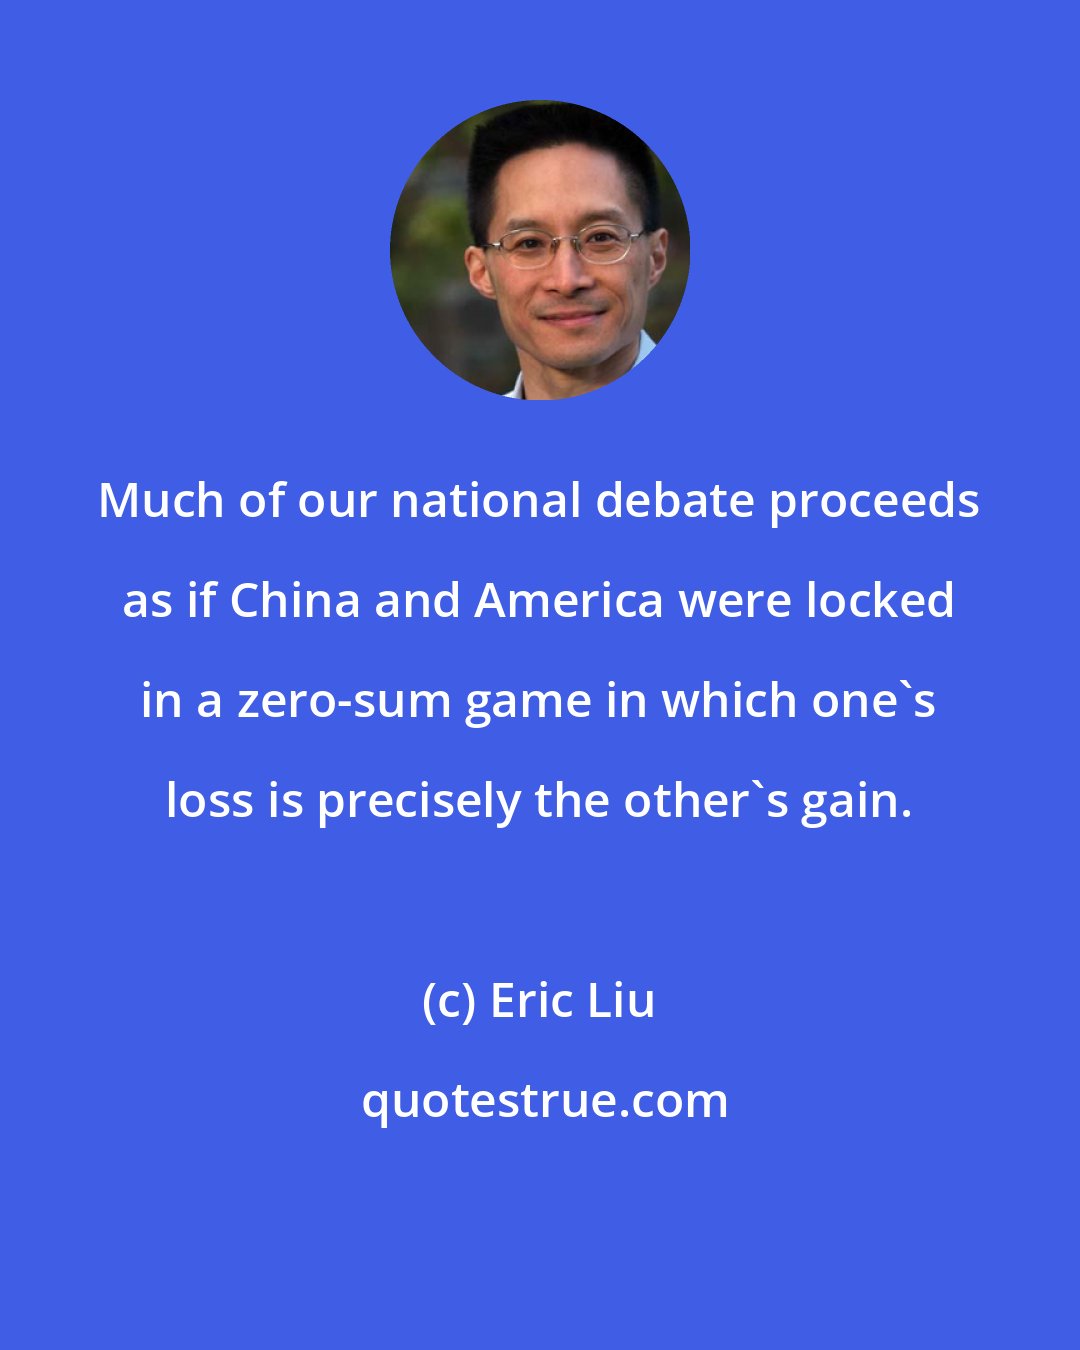 Eric Liu: Much of our national debate proceeds as if China and America were locked in a zero-sum game in which one's loss is precisely the other's gain.